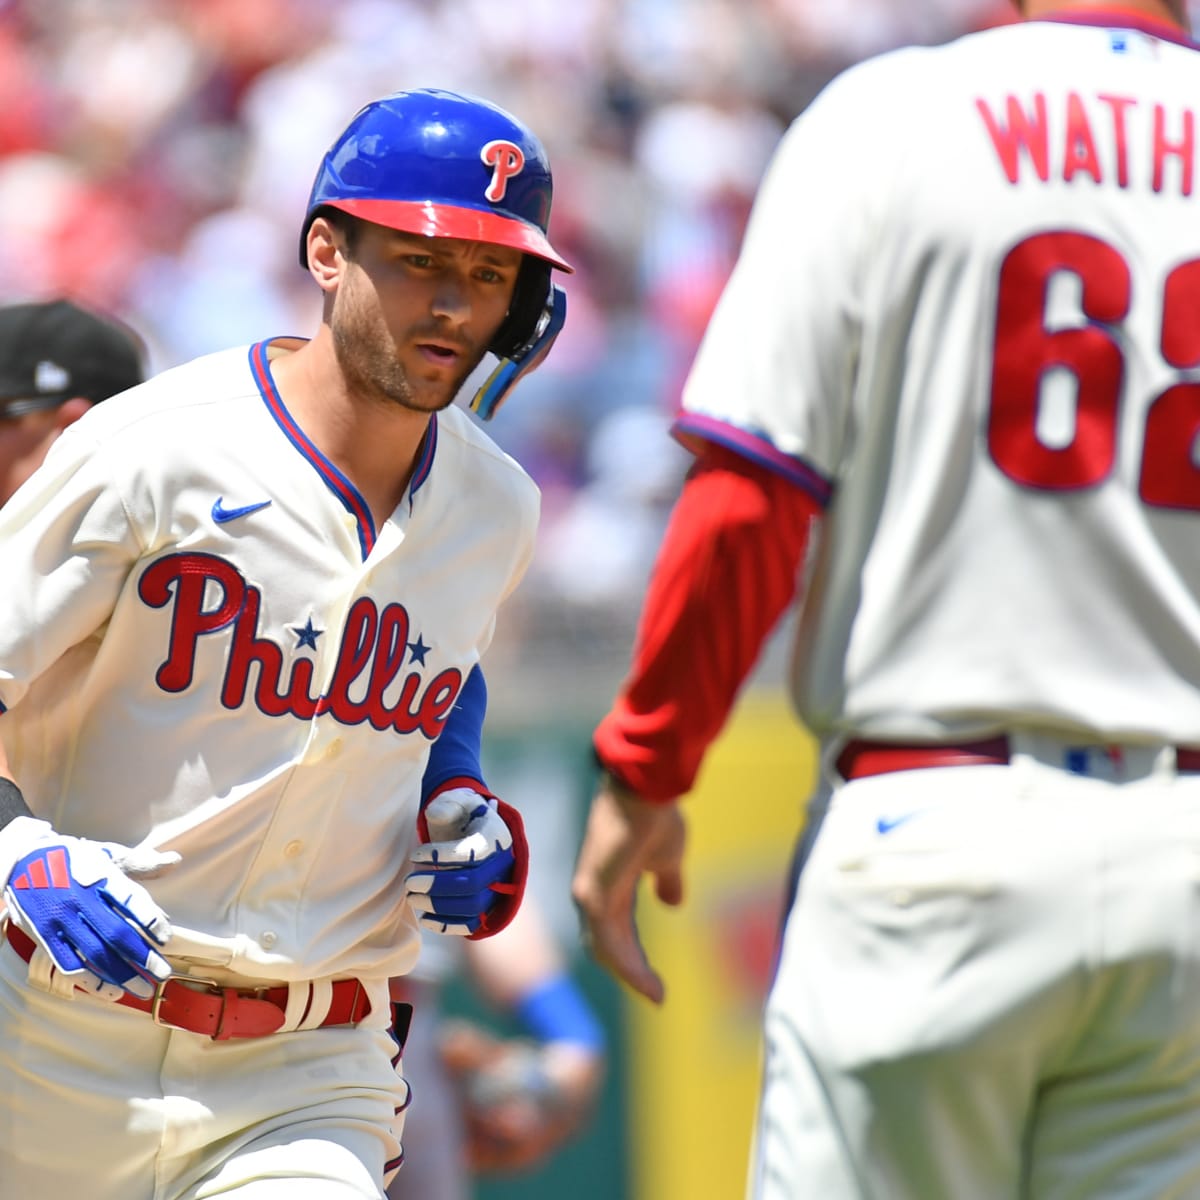 Watch: Trea Turner makes Jeter-like play to get first out  Phillies Nation  - Your source for Philadelphia Phillies news, opinion, history, rumors,  events, and other fun stuff.